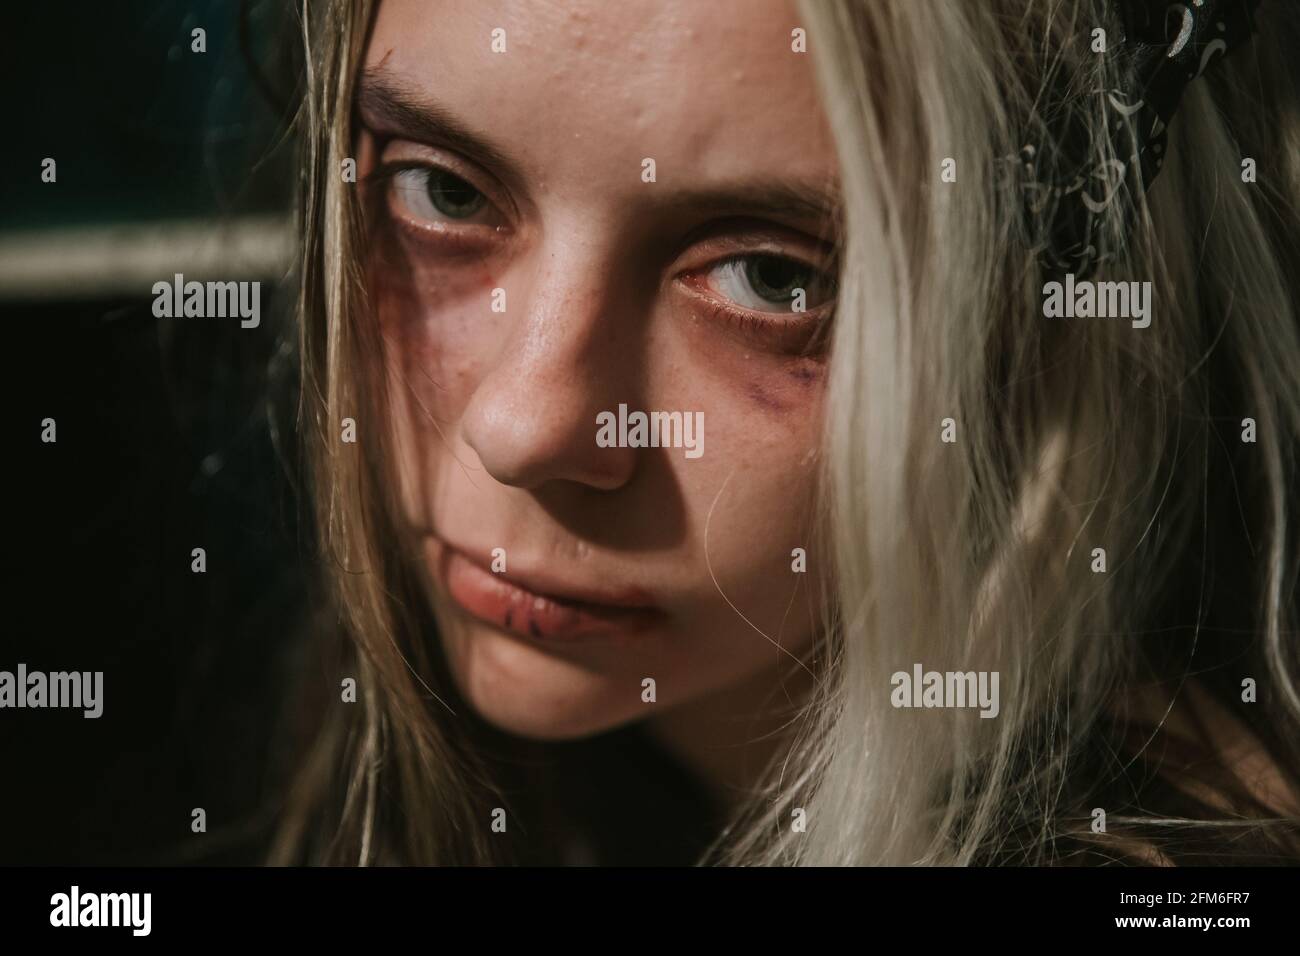 close-up portrait of frightened abused young woman Stock Photo